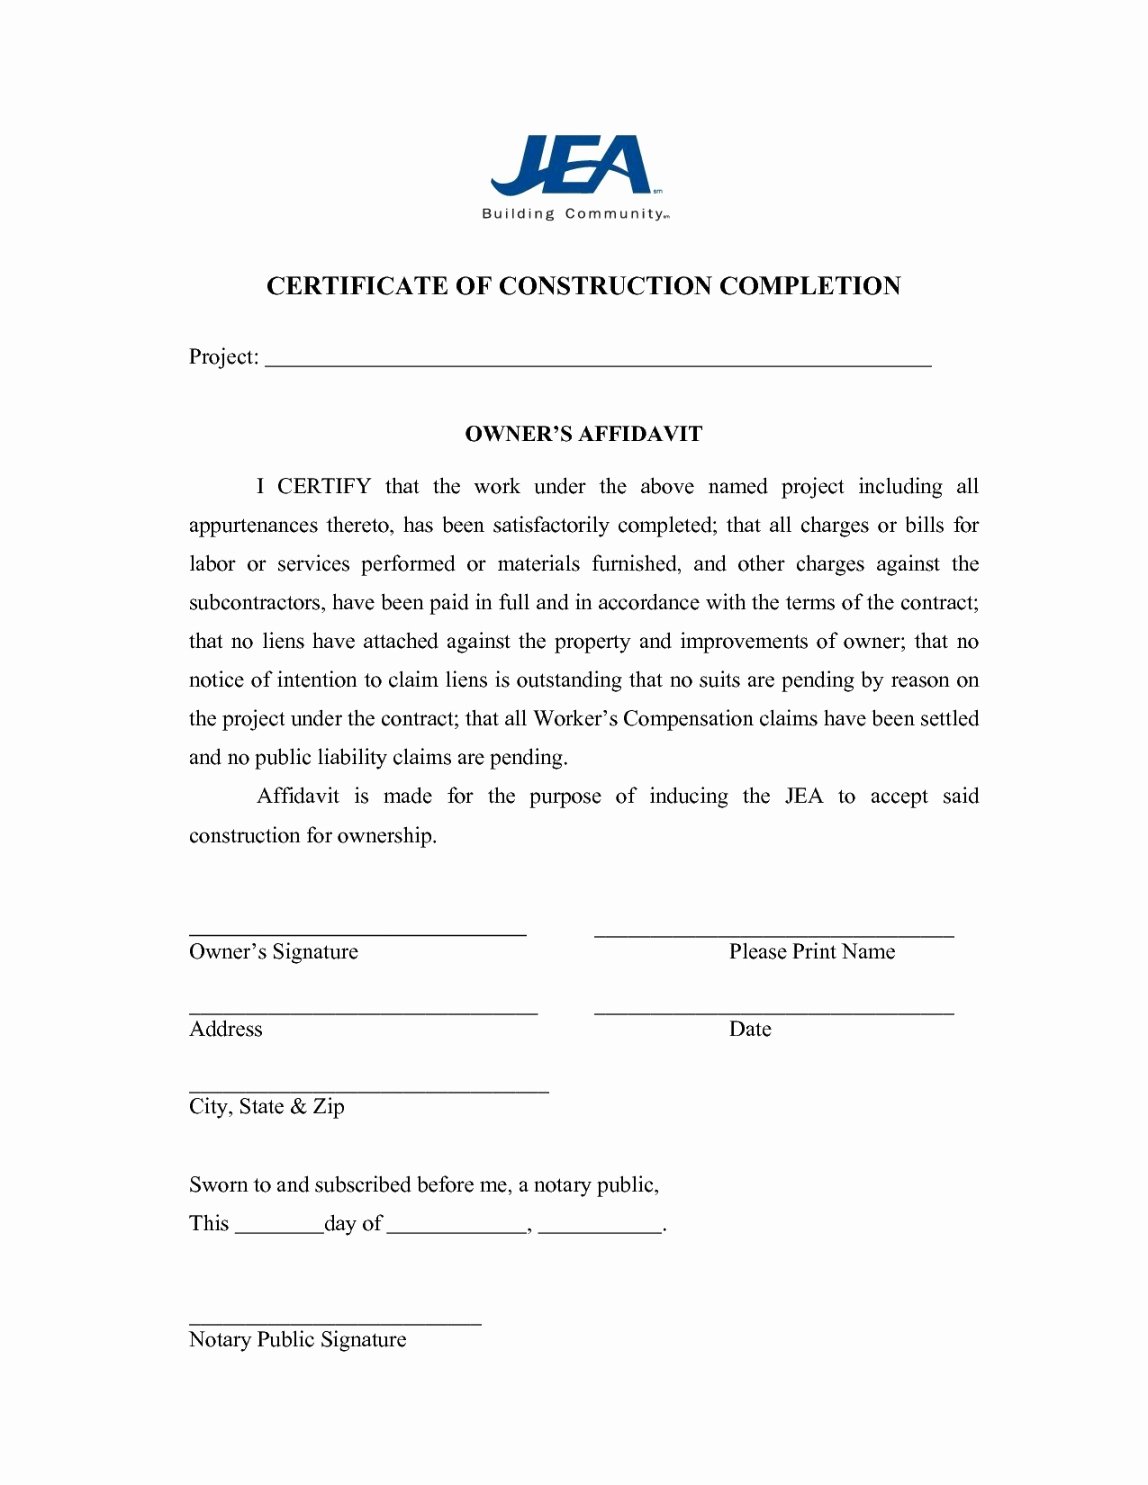 Construction Certificate Of Completion Template Unique Construction Pletion Certificate Template